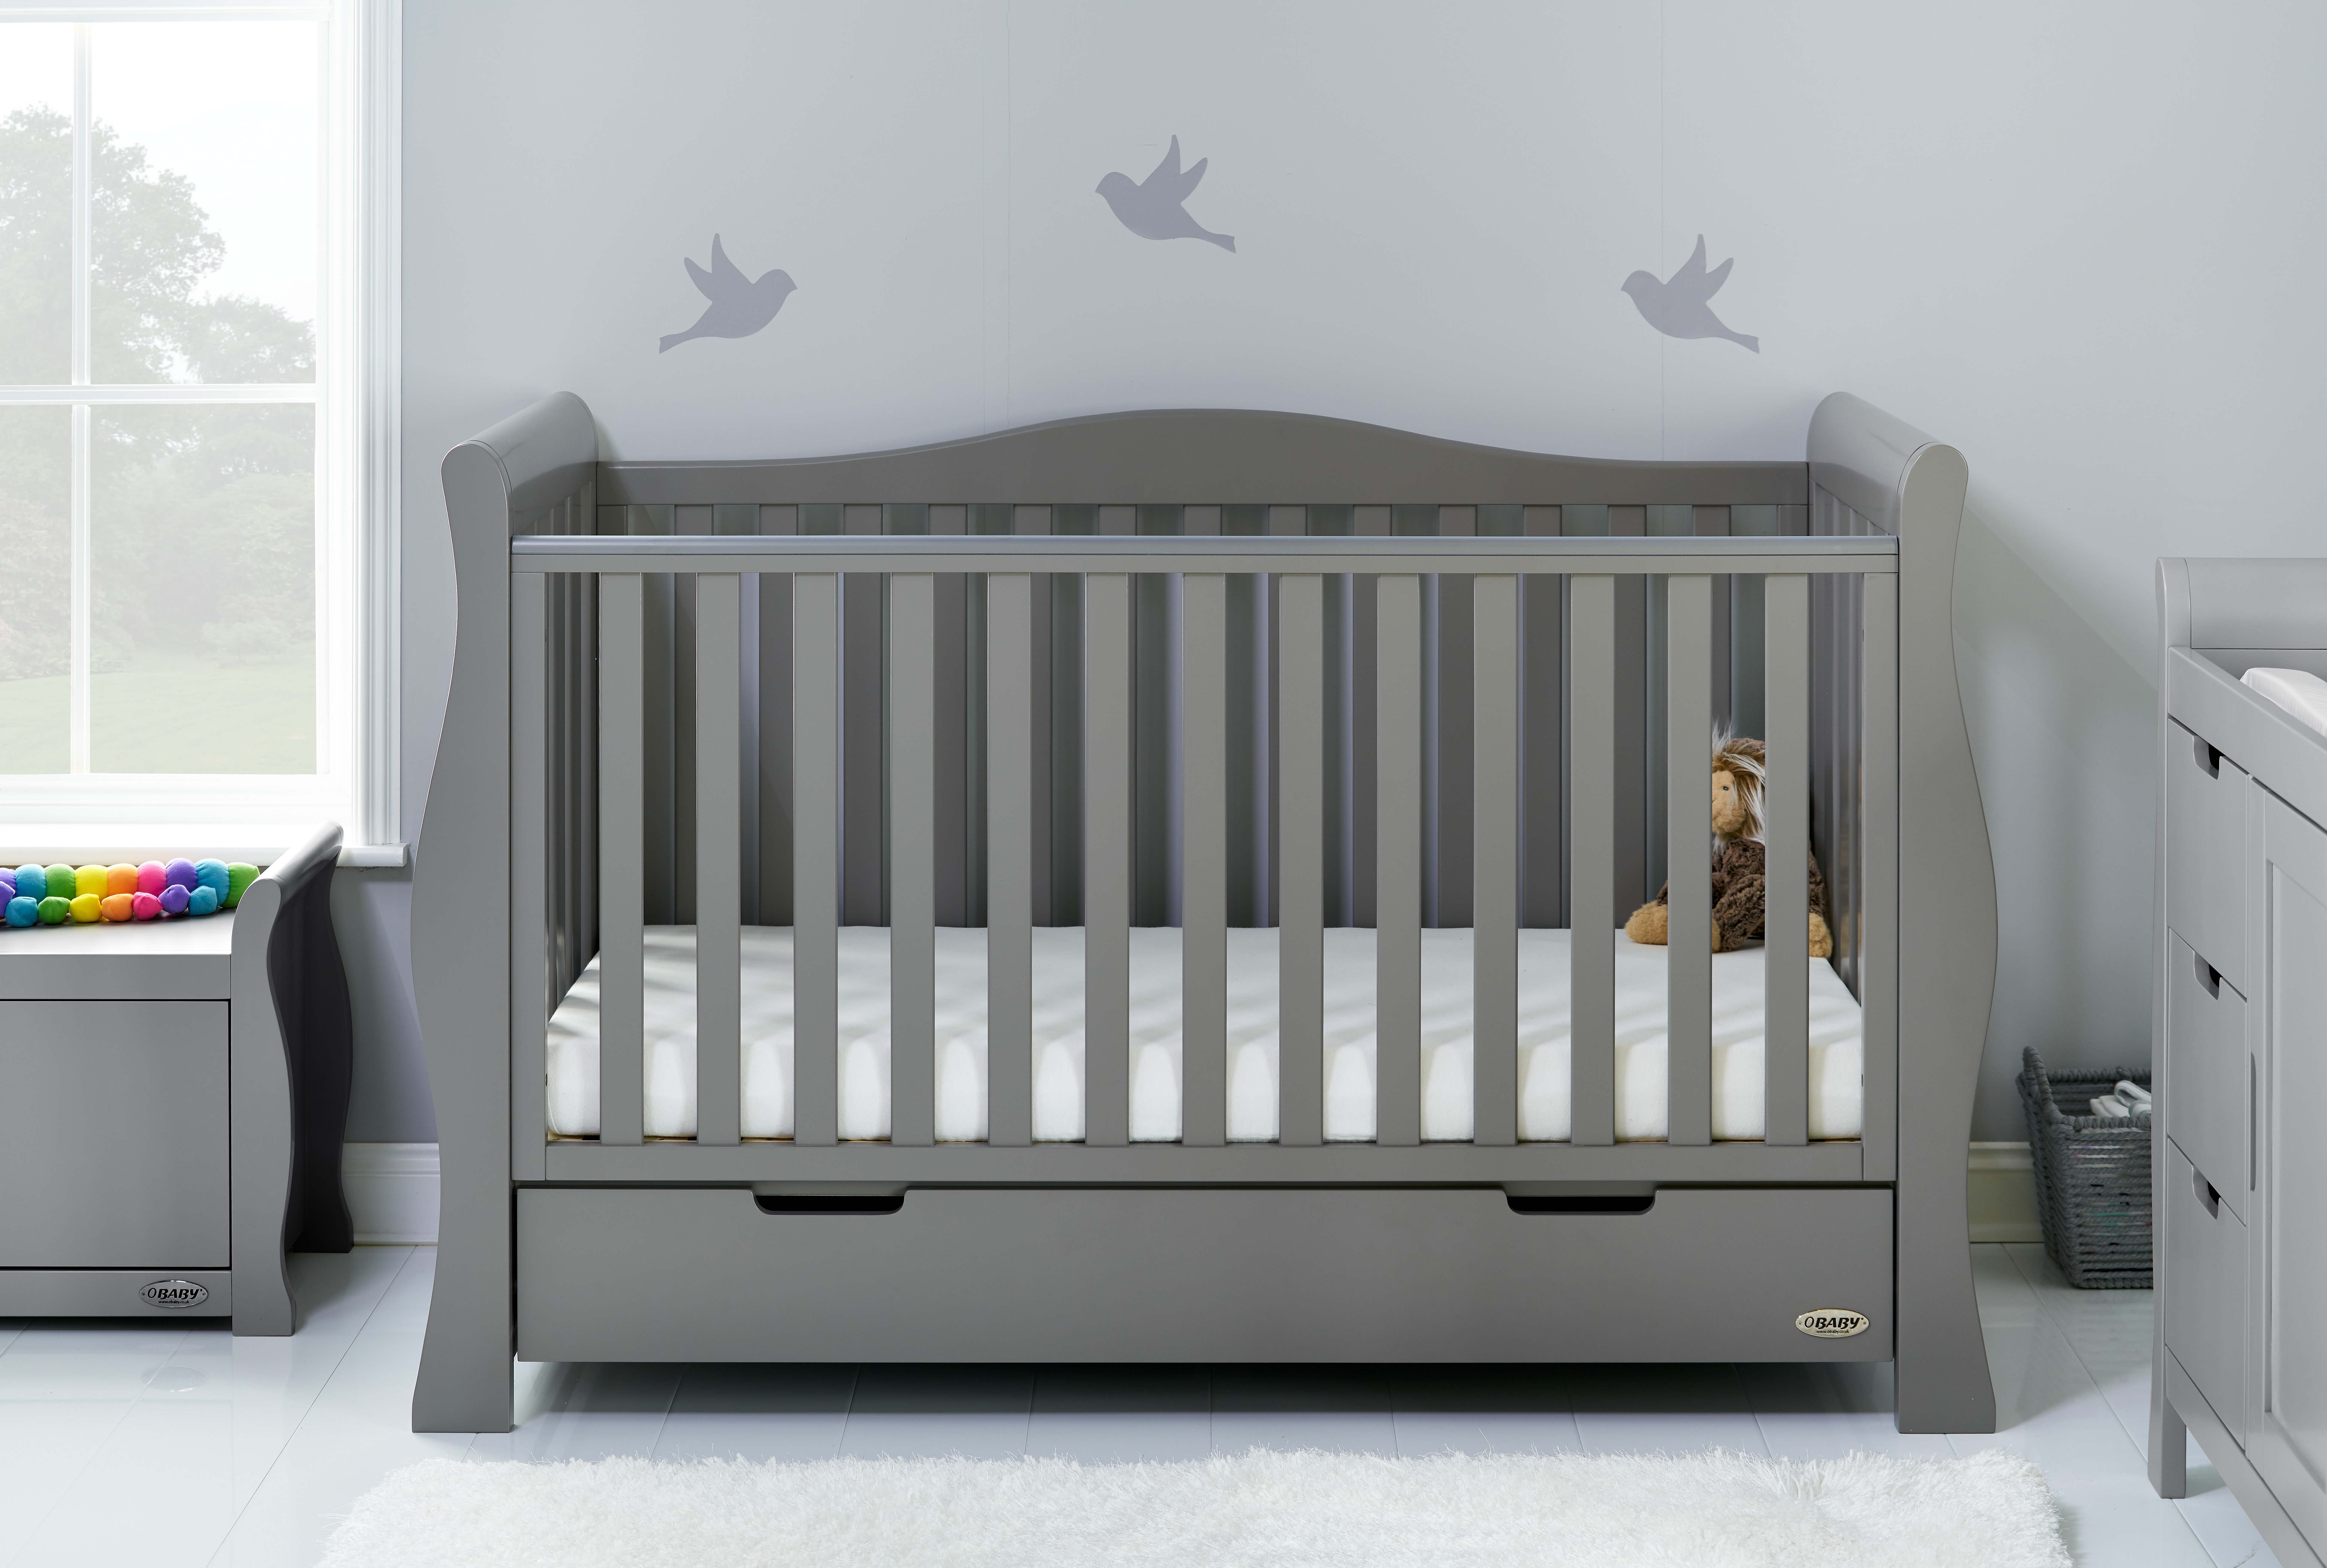 stamford luxe cot bed